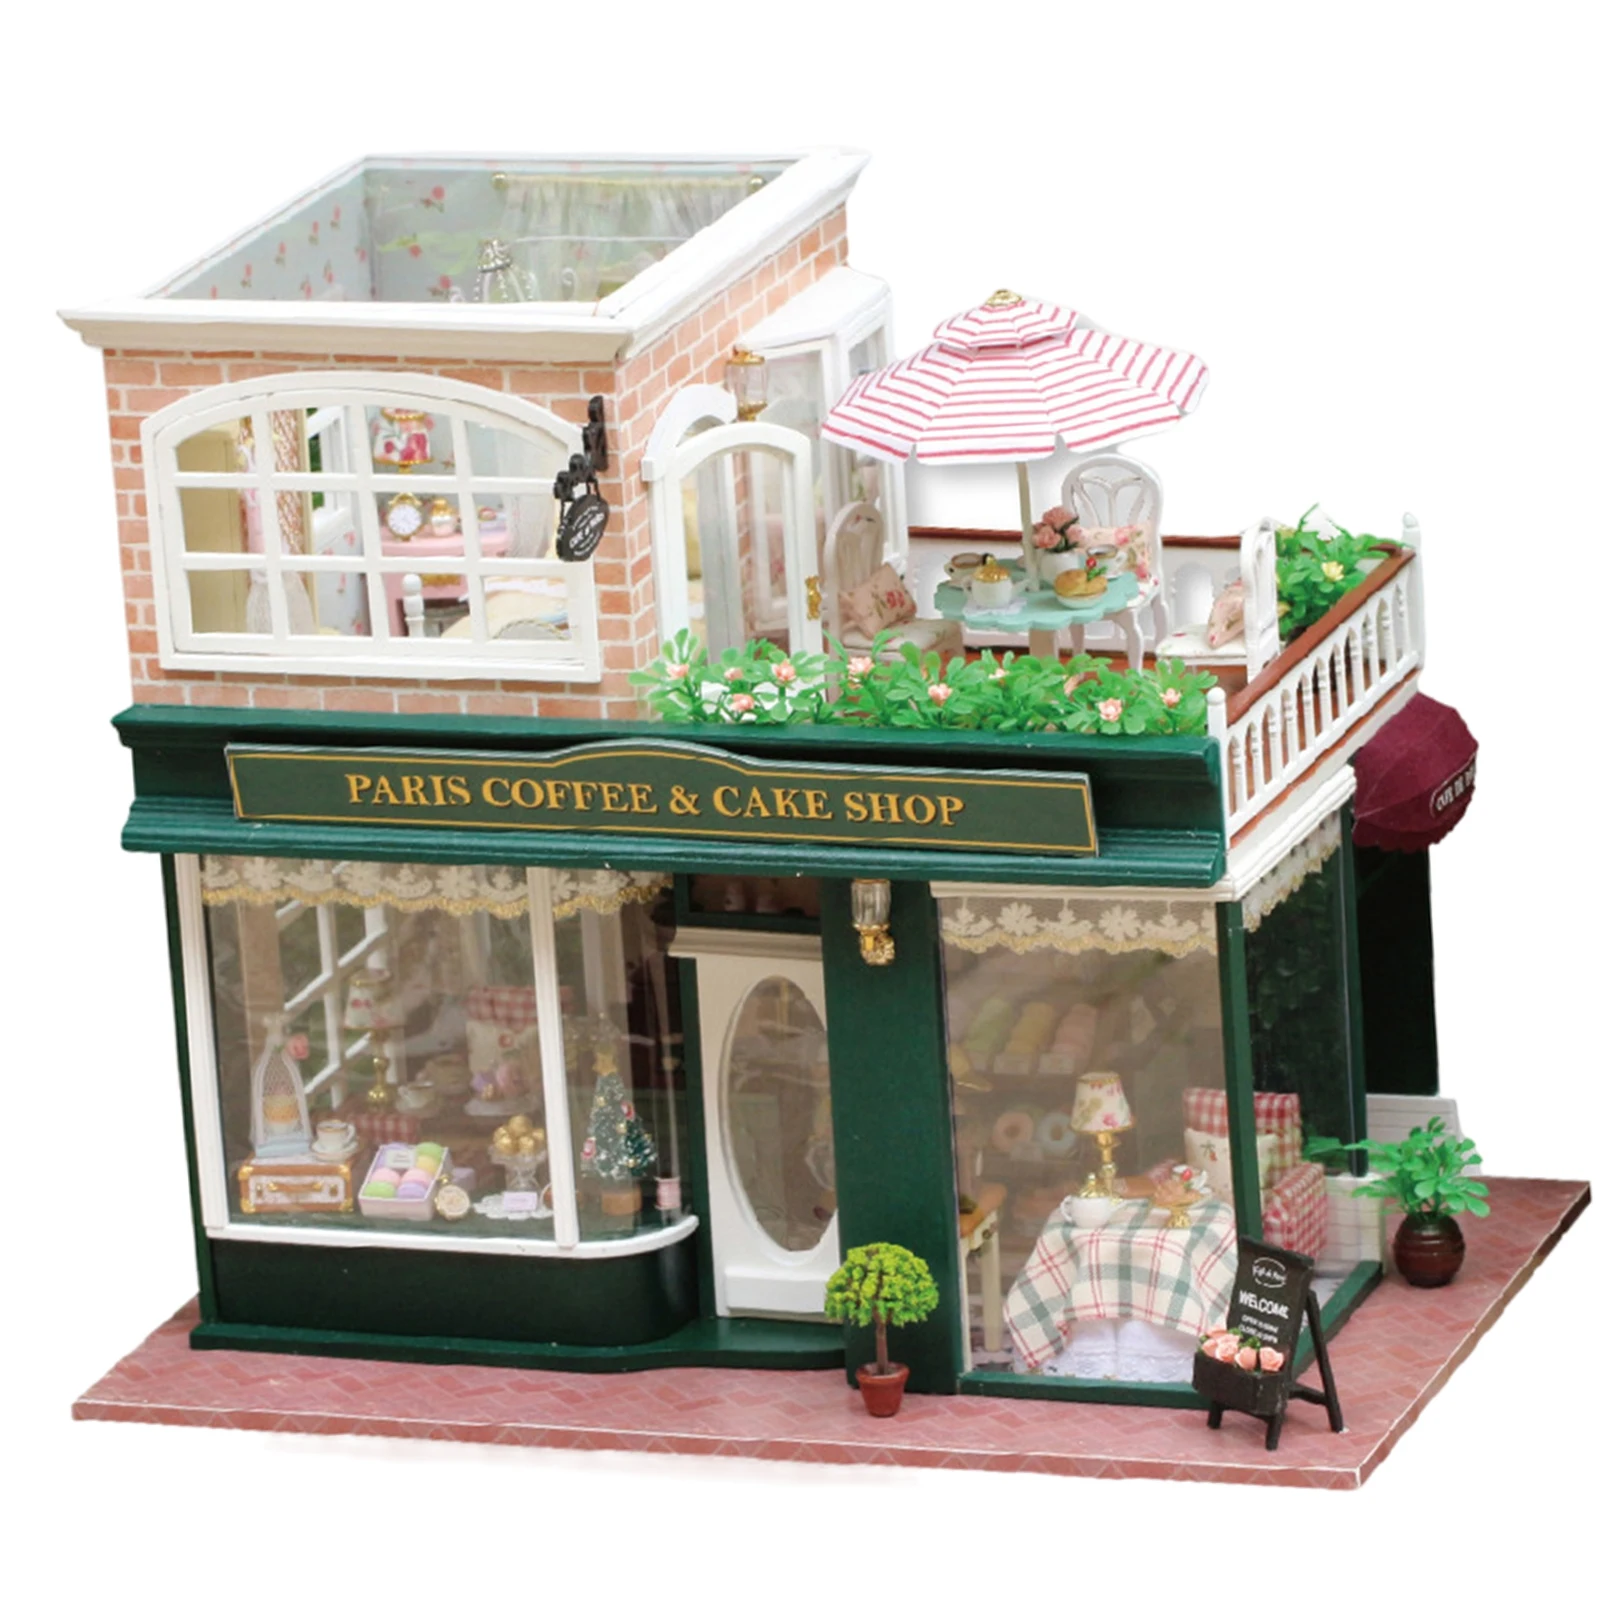 New 3D DIY Doll House with Furniture & Accessories Toy Miniature Doll House Creative Paris Coffee & Cake Shop DIY Doll House Toy